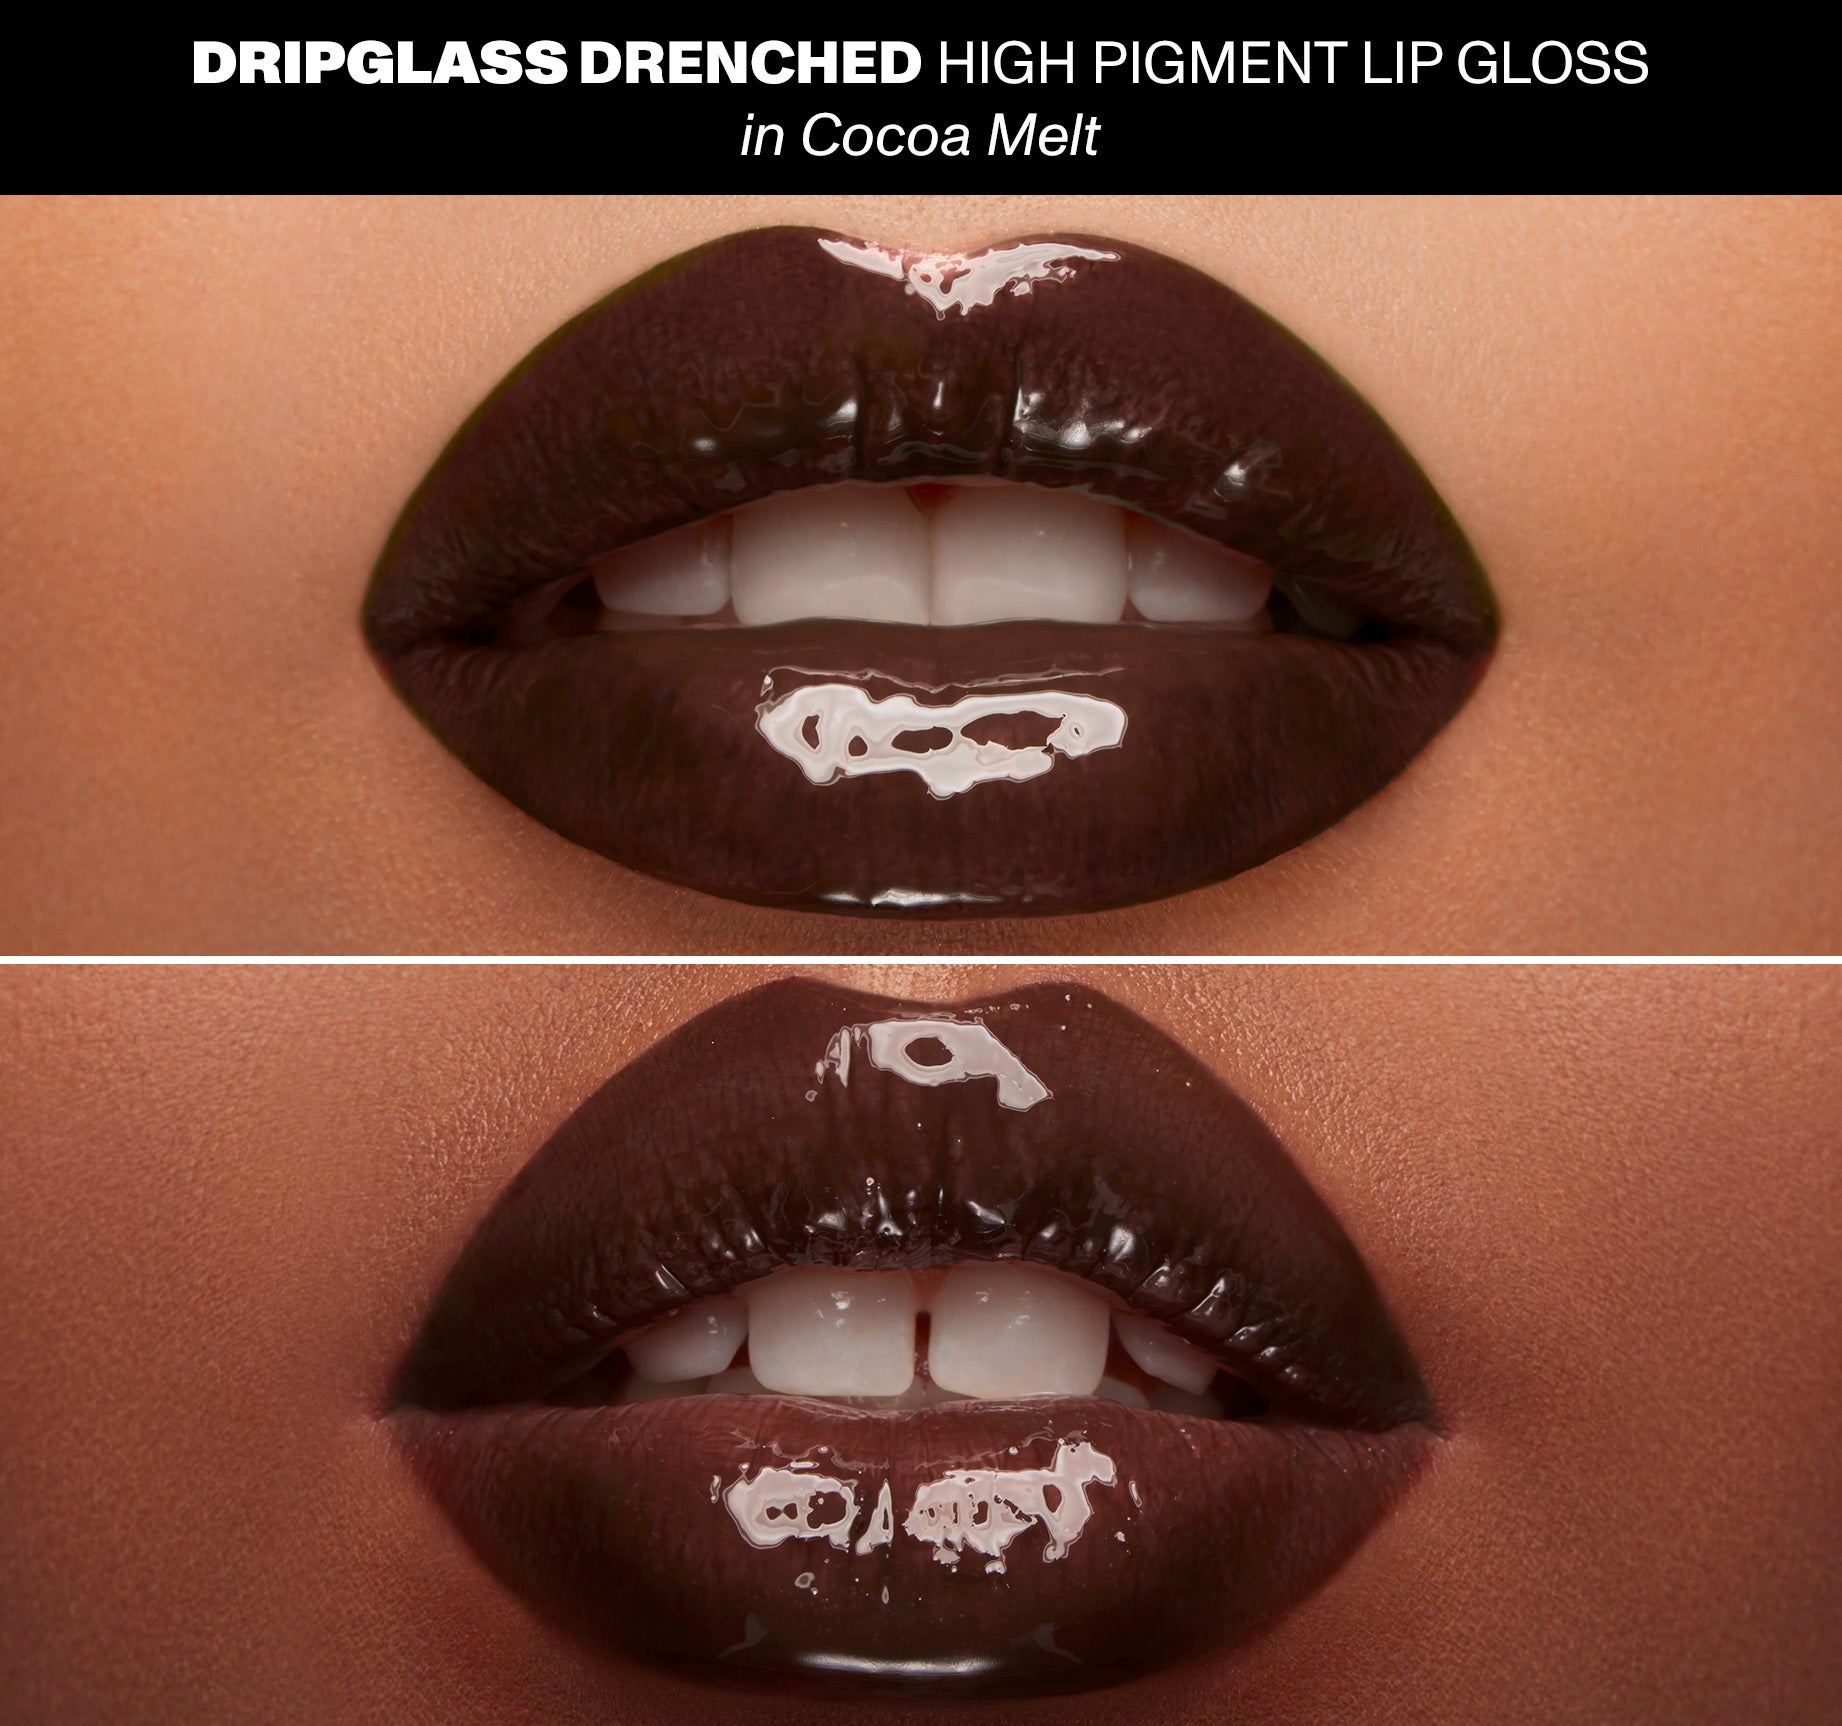 Dripglass Drenched High Pigment Lip Gloss - Cocoa Melt - Image 3